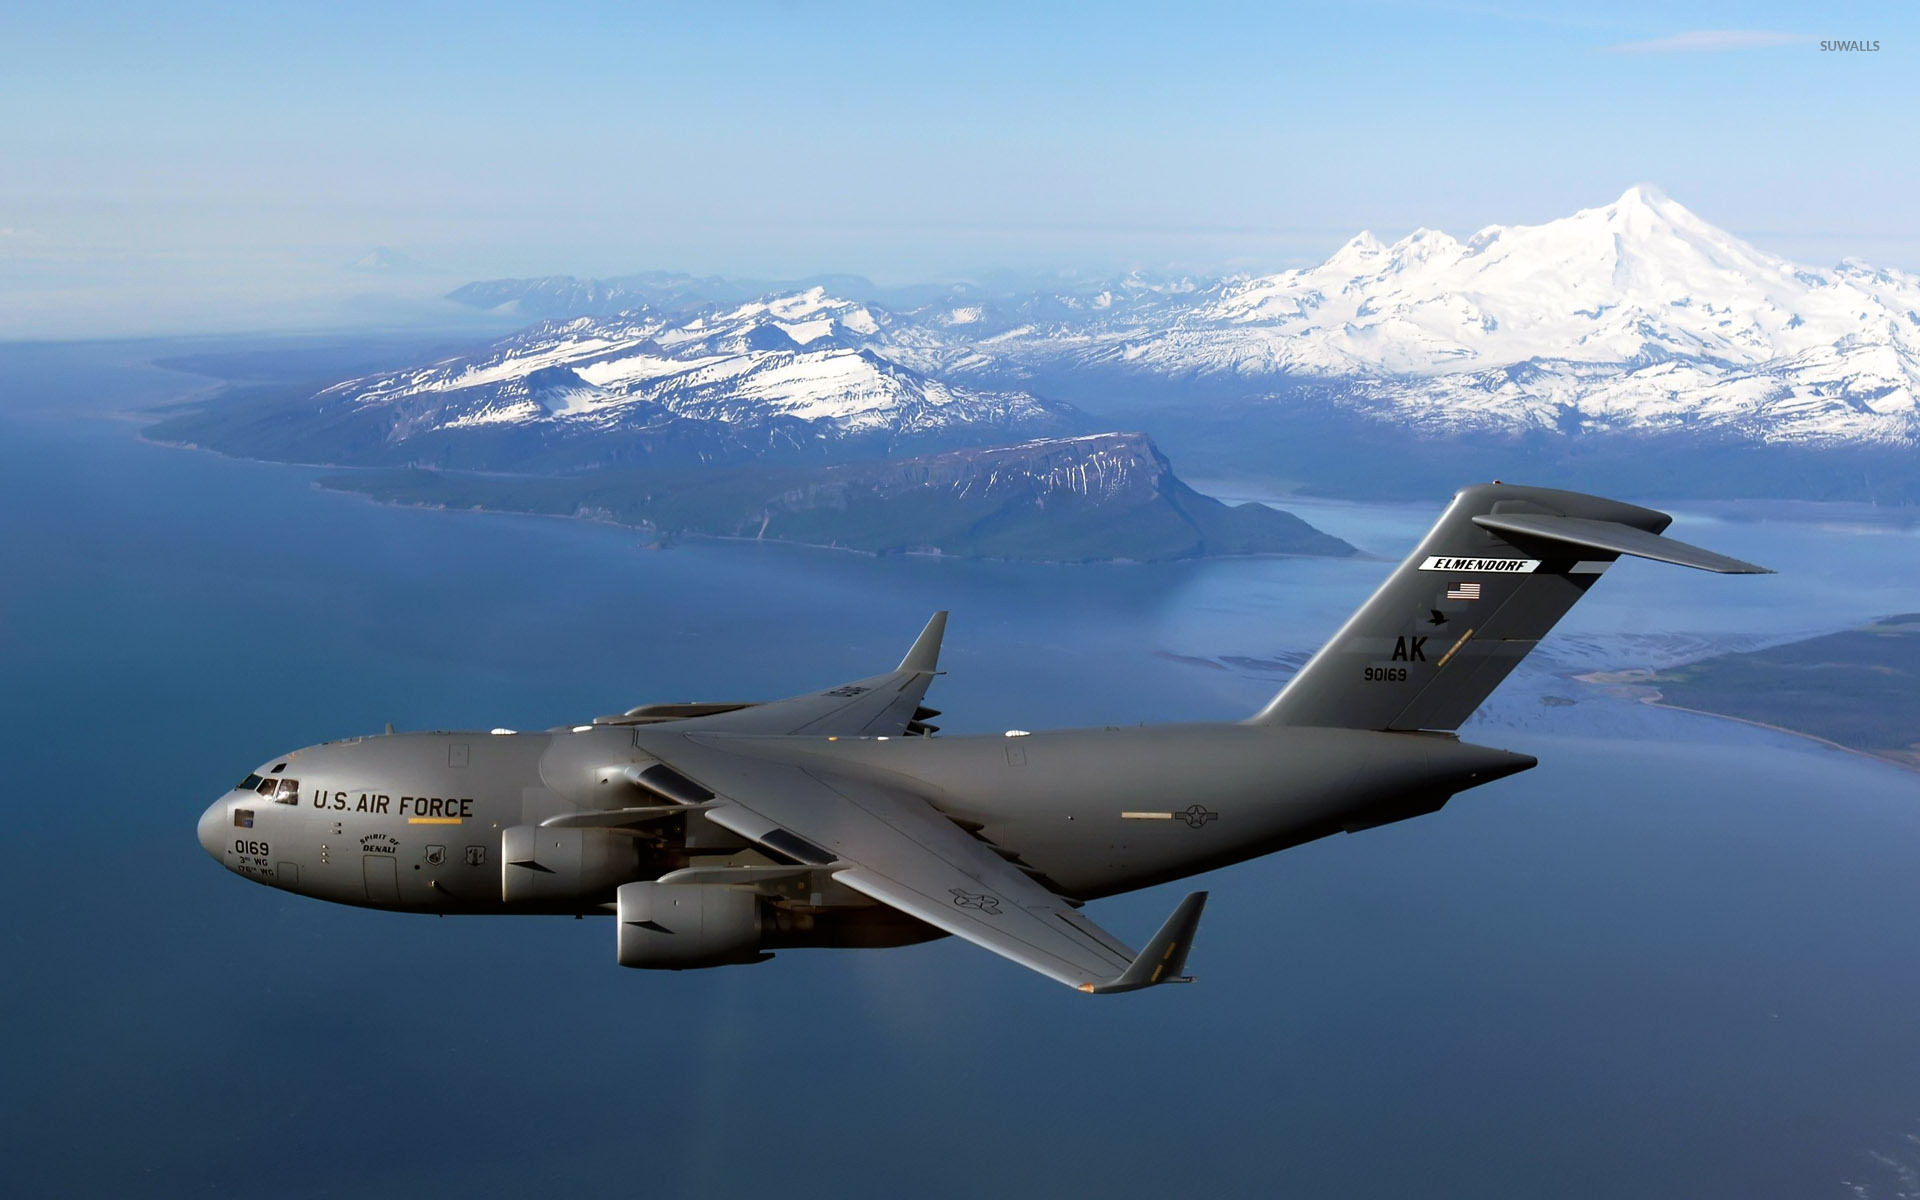 Boeing C-17 Globemaster III Backgrounds, Compatible - PC, Mobile, Gadgets| 1920x1200 px